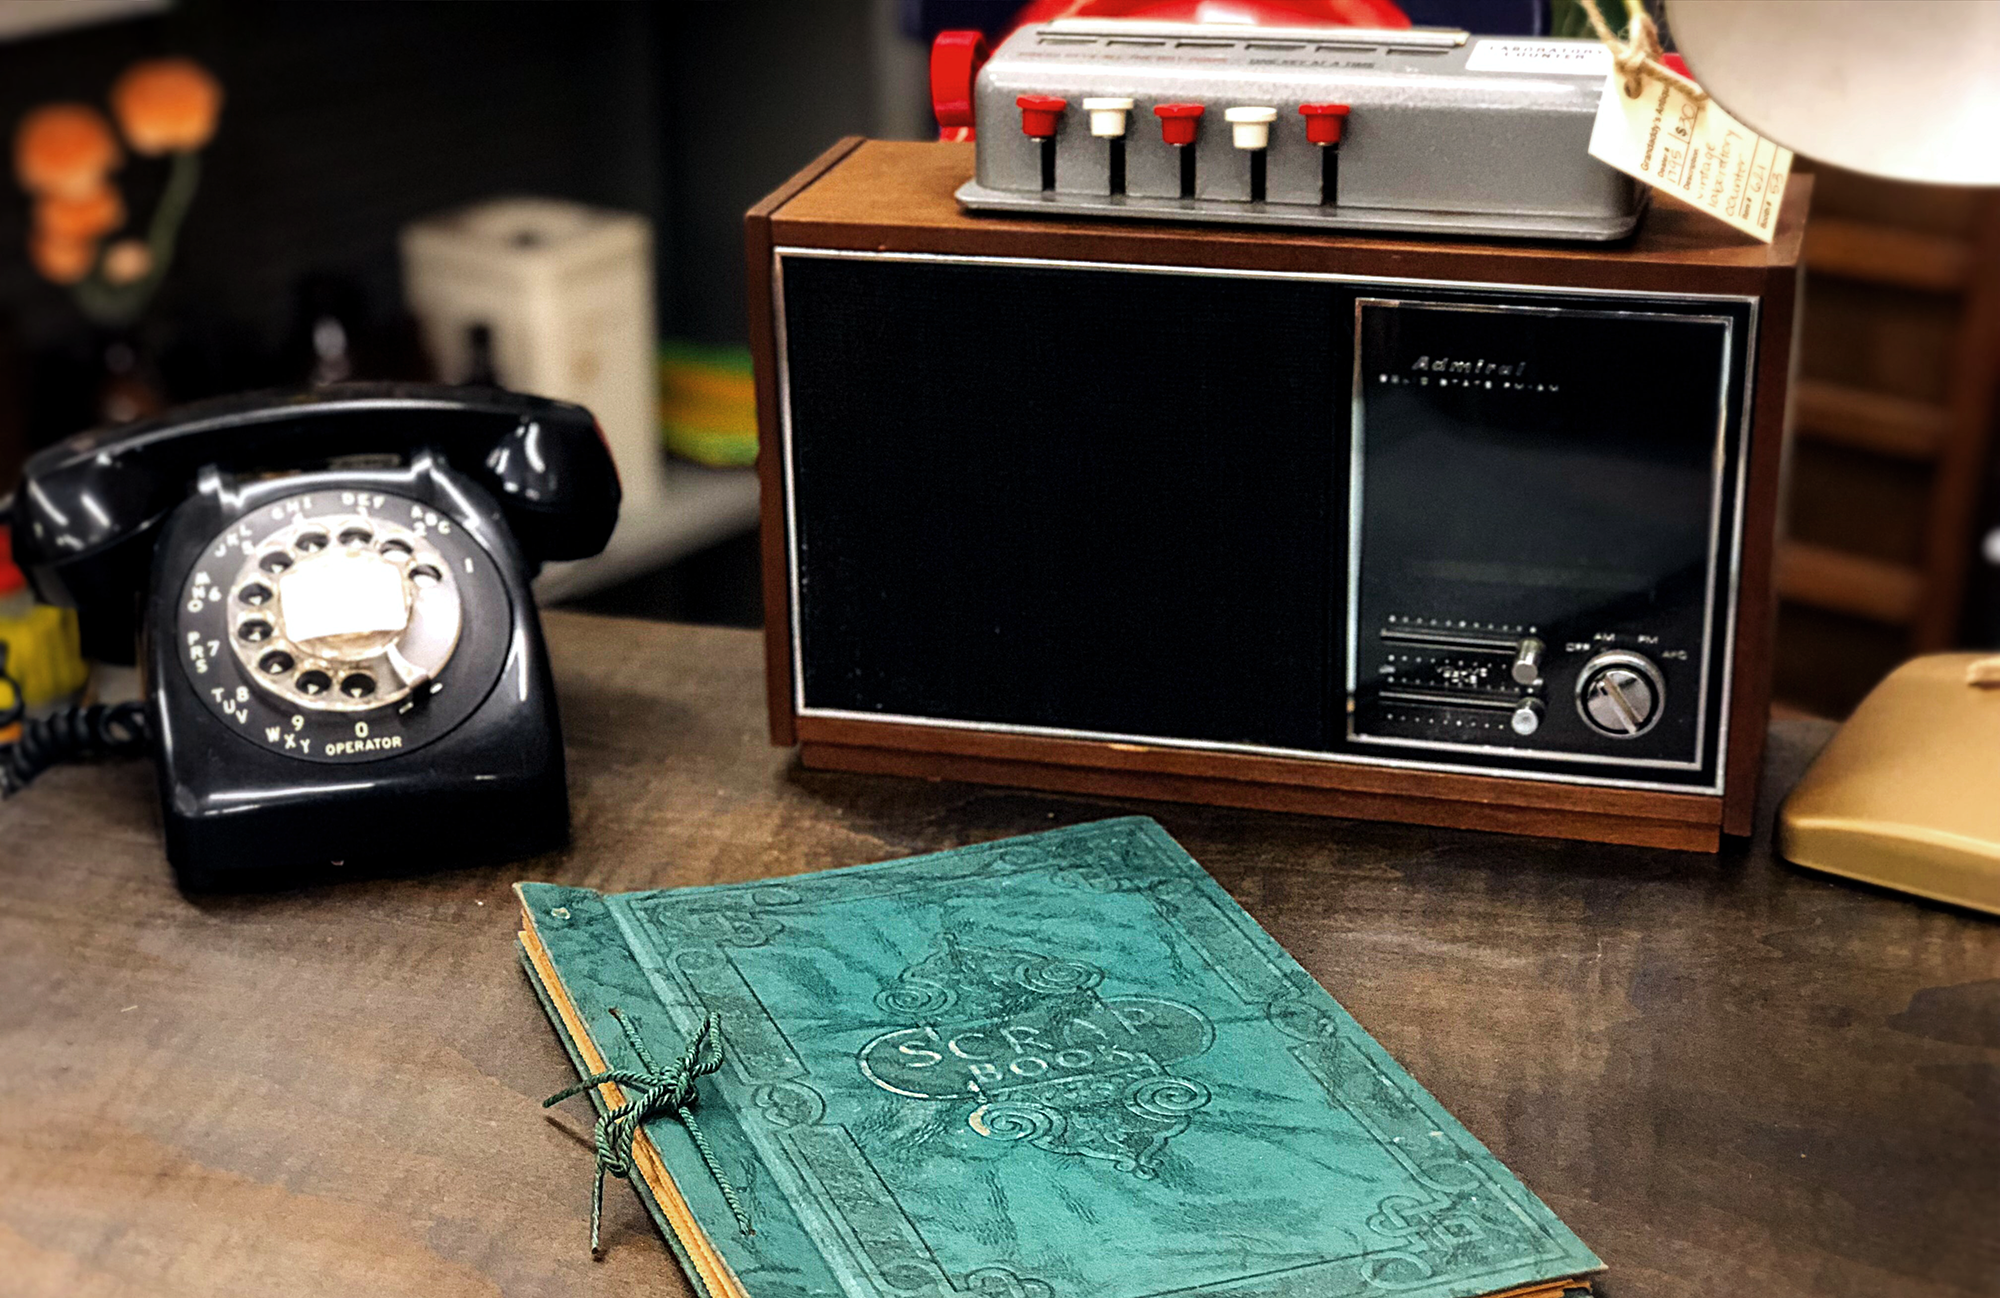 alt="Showing old phone and radio"